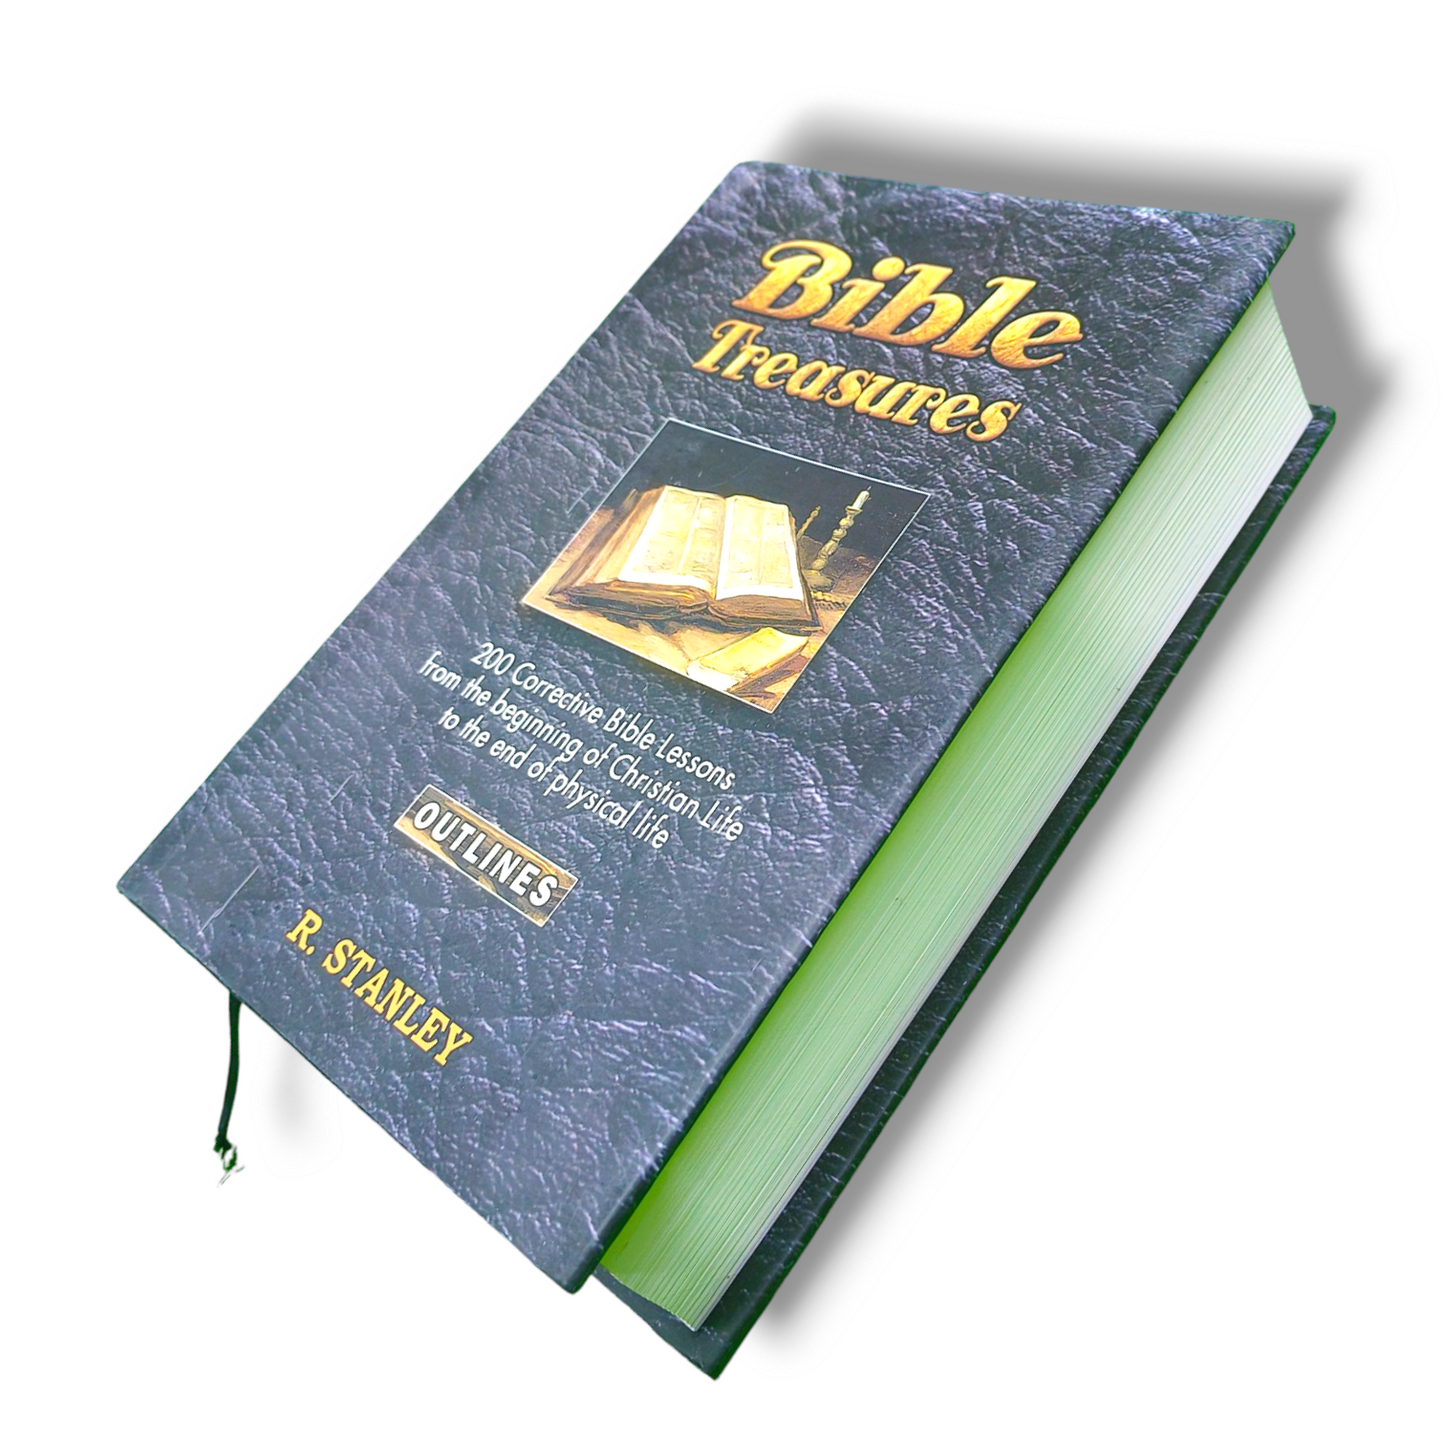 Bible Treasures Out line Book | Large Print Edition | Hard Bound | Gospel Book | New Edition